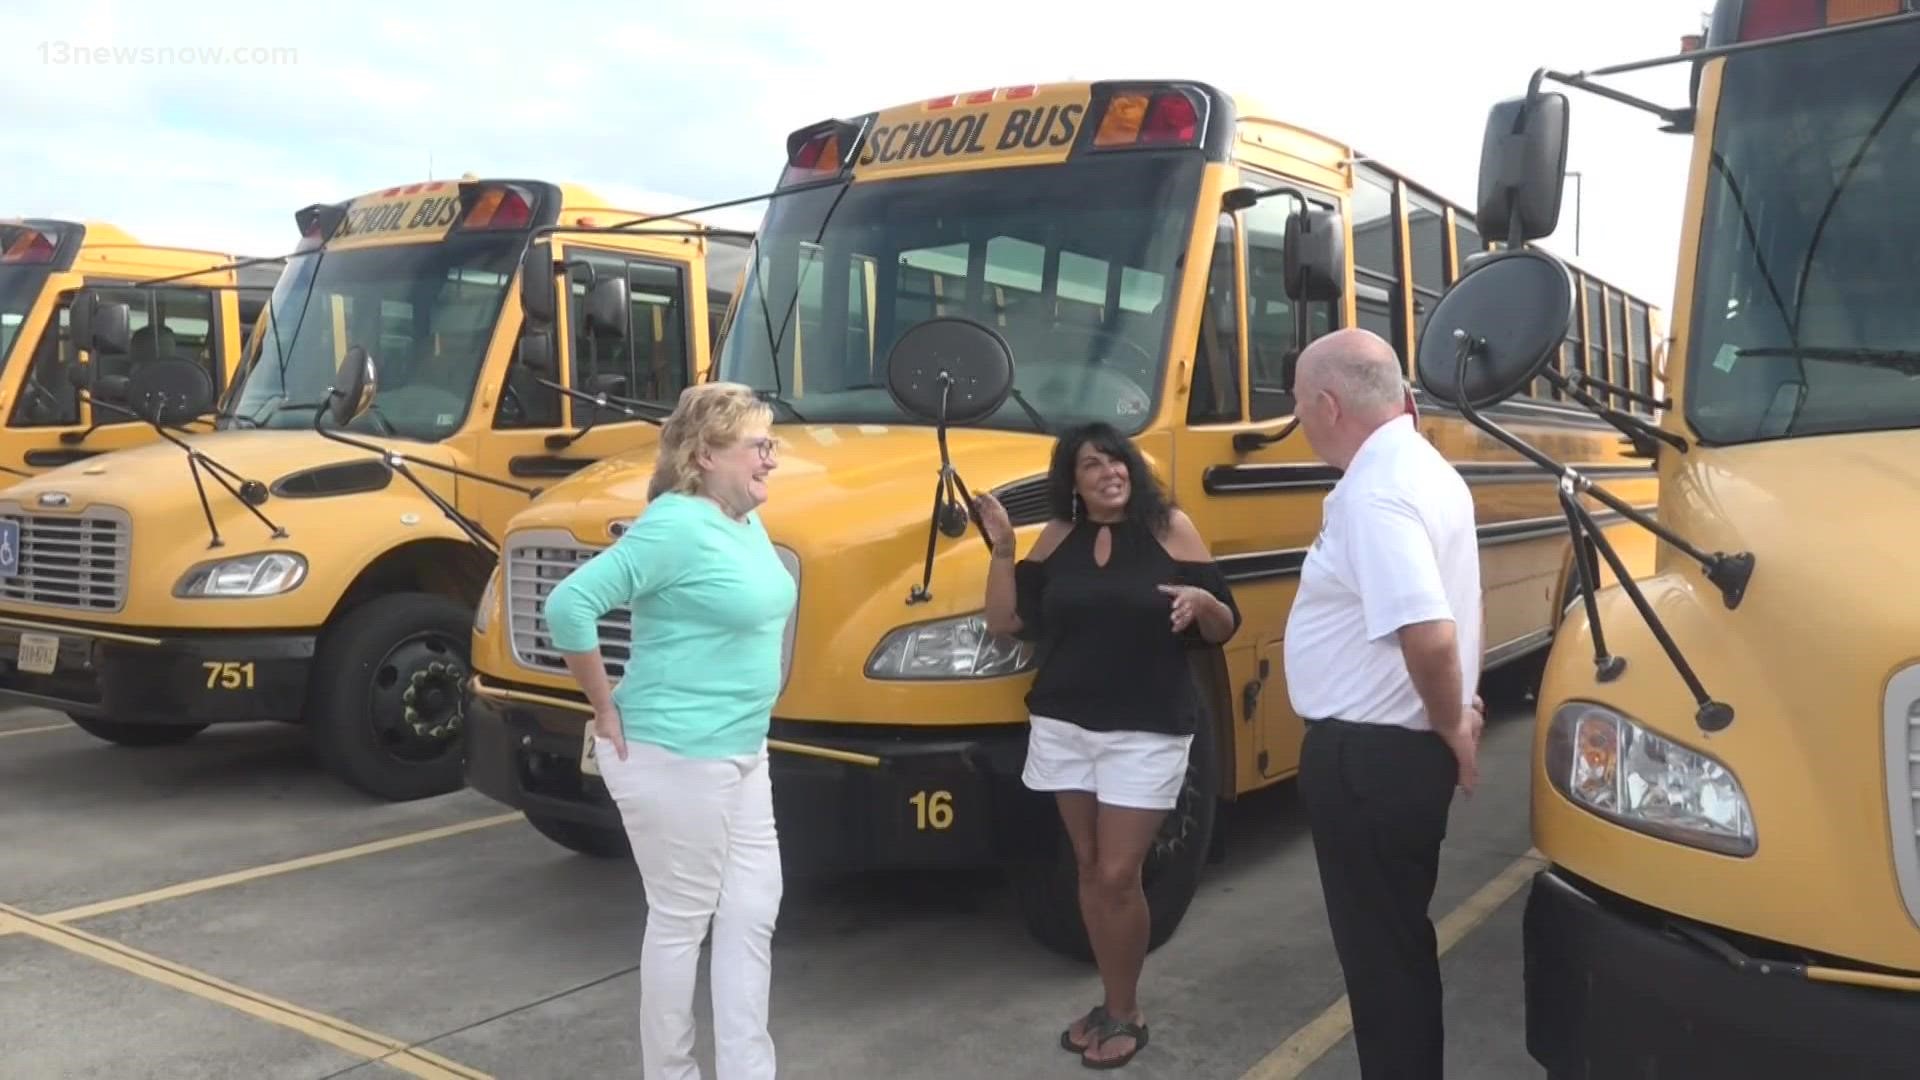 Virginia Beach school division leaders said they are down 100 drivers ahead of the first day of school. They're not the only local city feeling shortages.